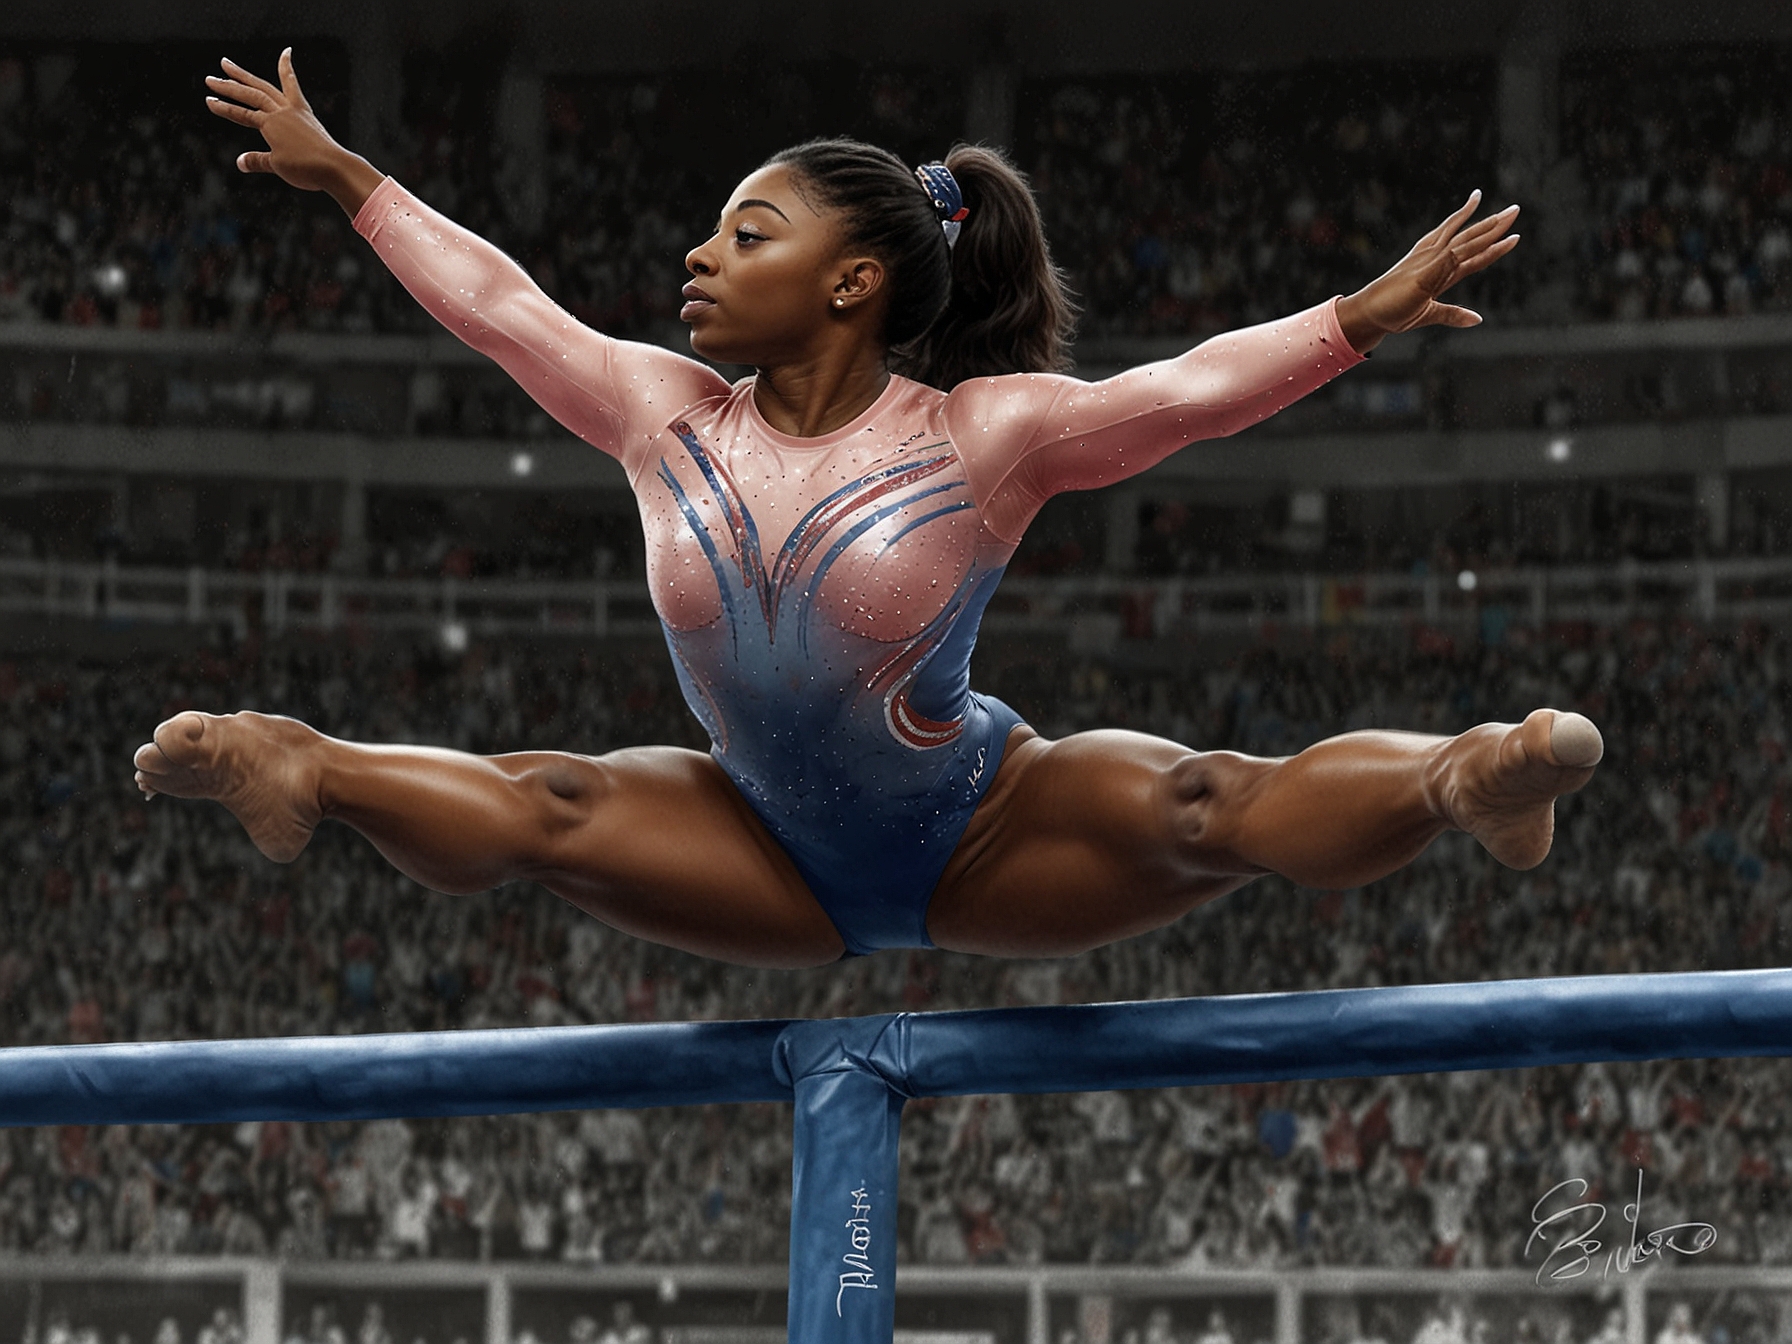 A captivating shot of Simone Biles performing a complex gymnastics routine, highlighting her athletic prowess and the incredible skills that have made her a global icon.